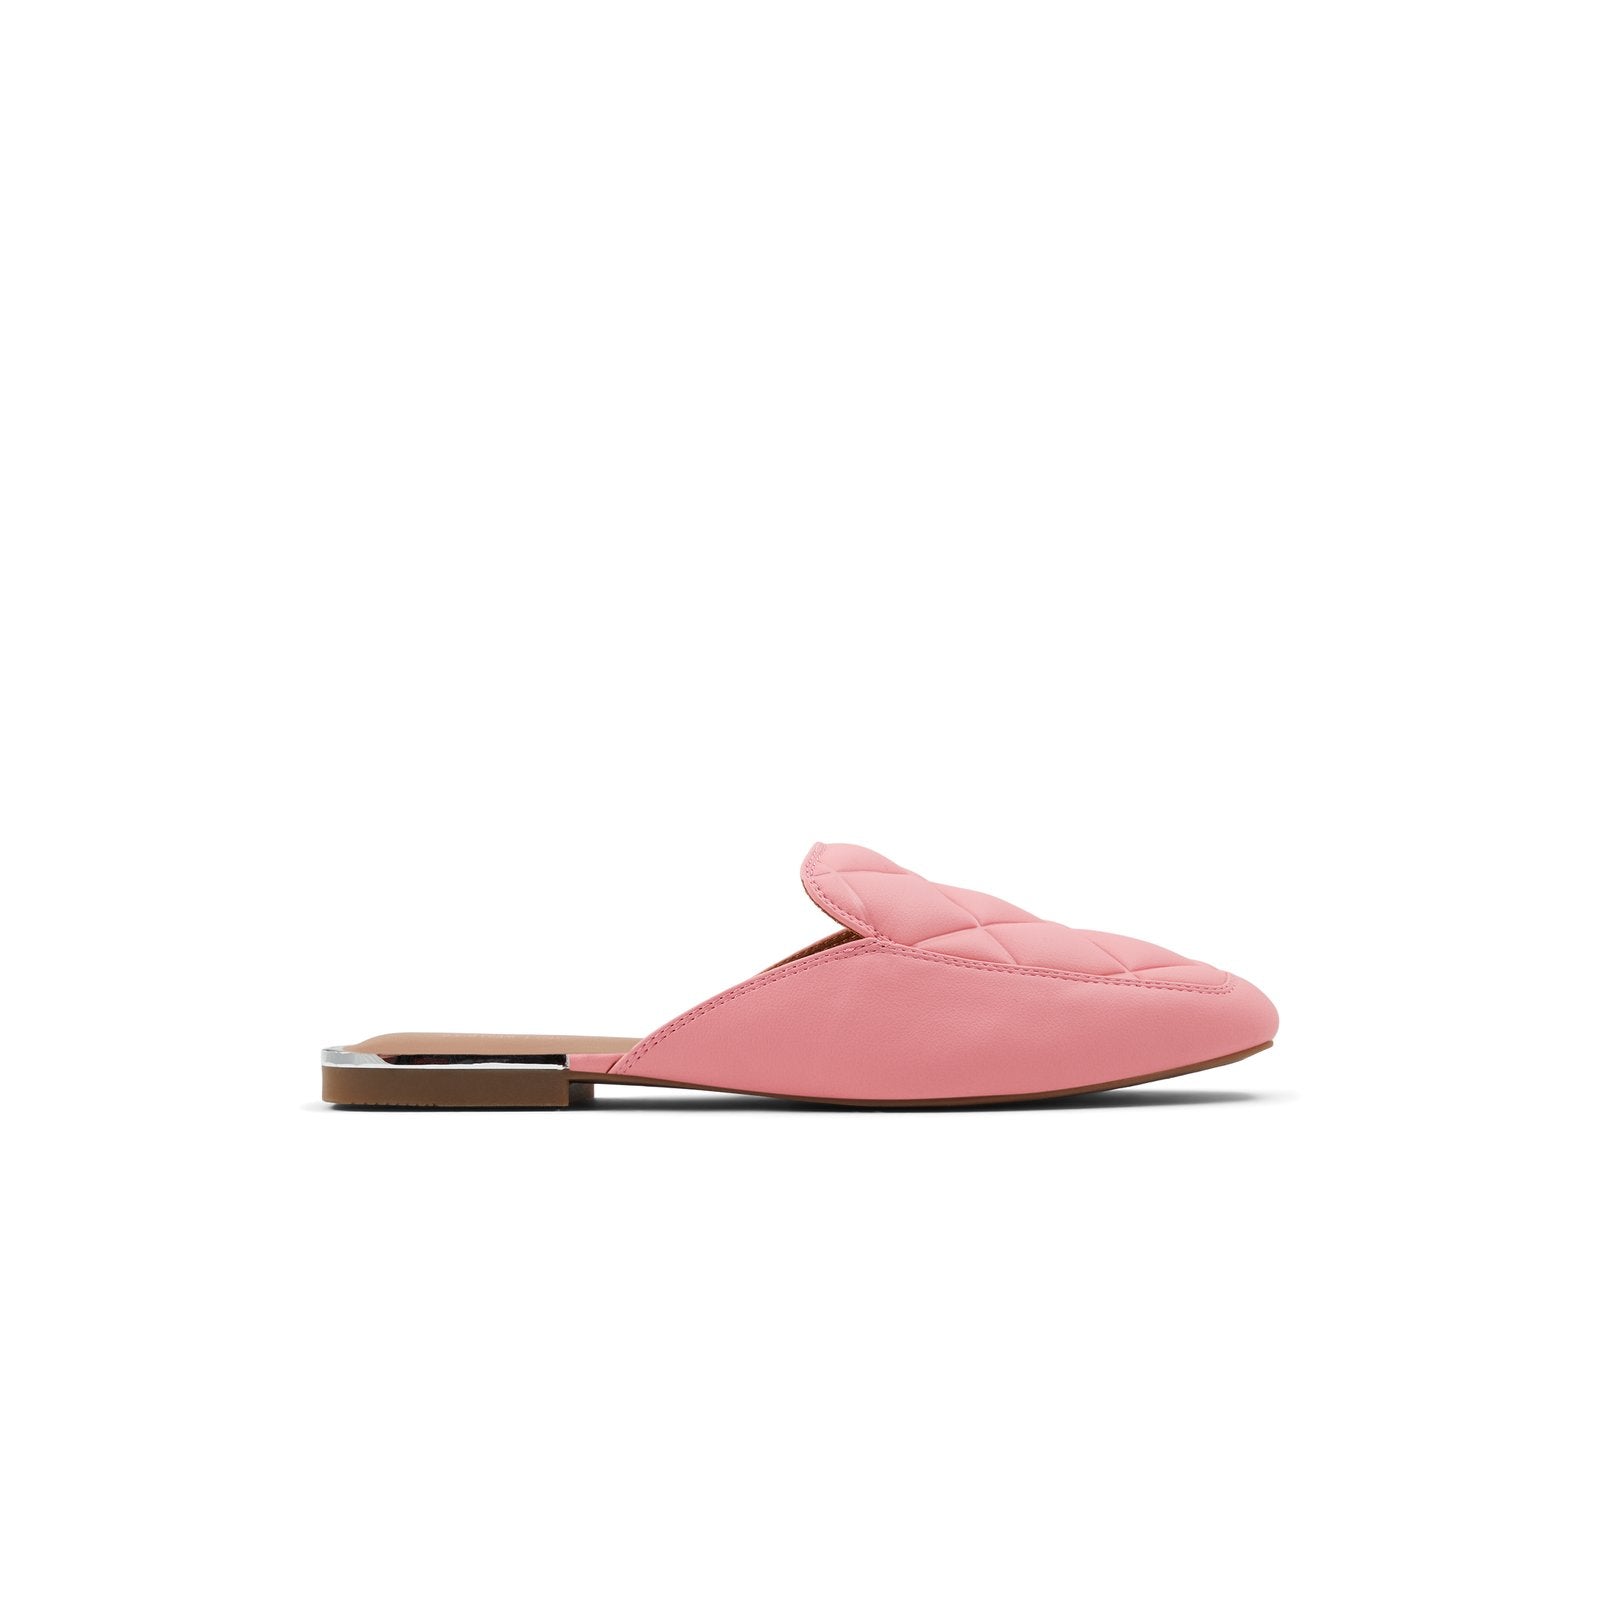 Dollie Women Shoes - Bright Pink - CALL IT SPRING KSA